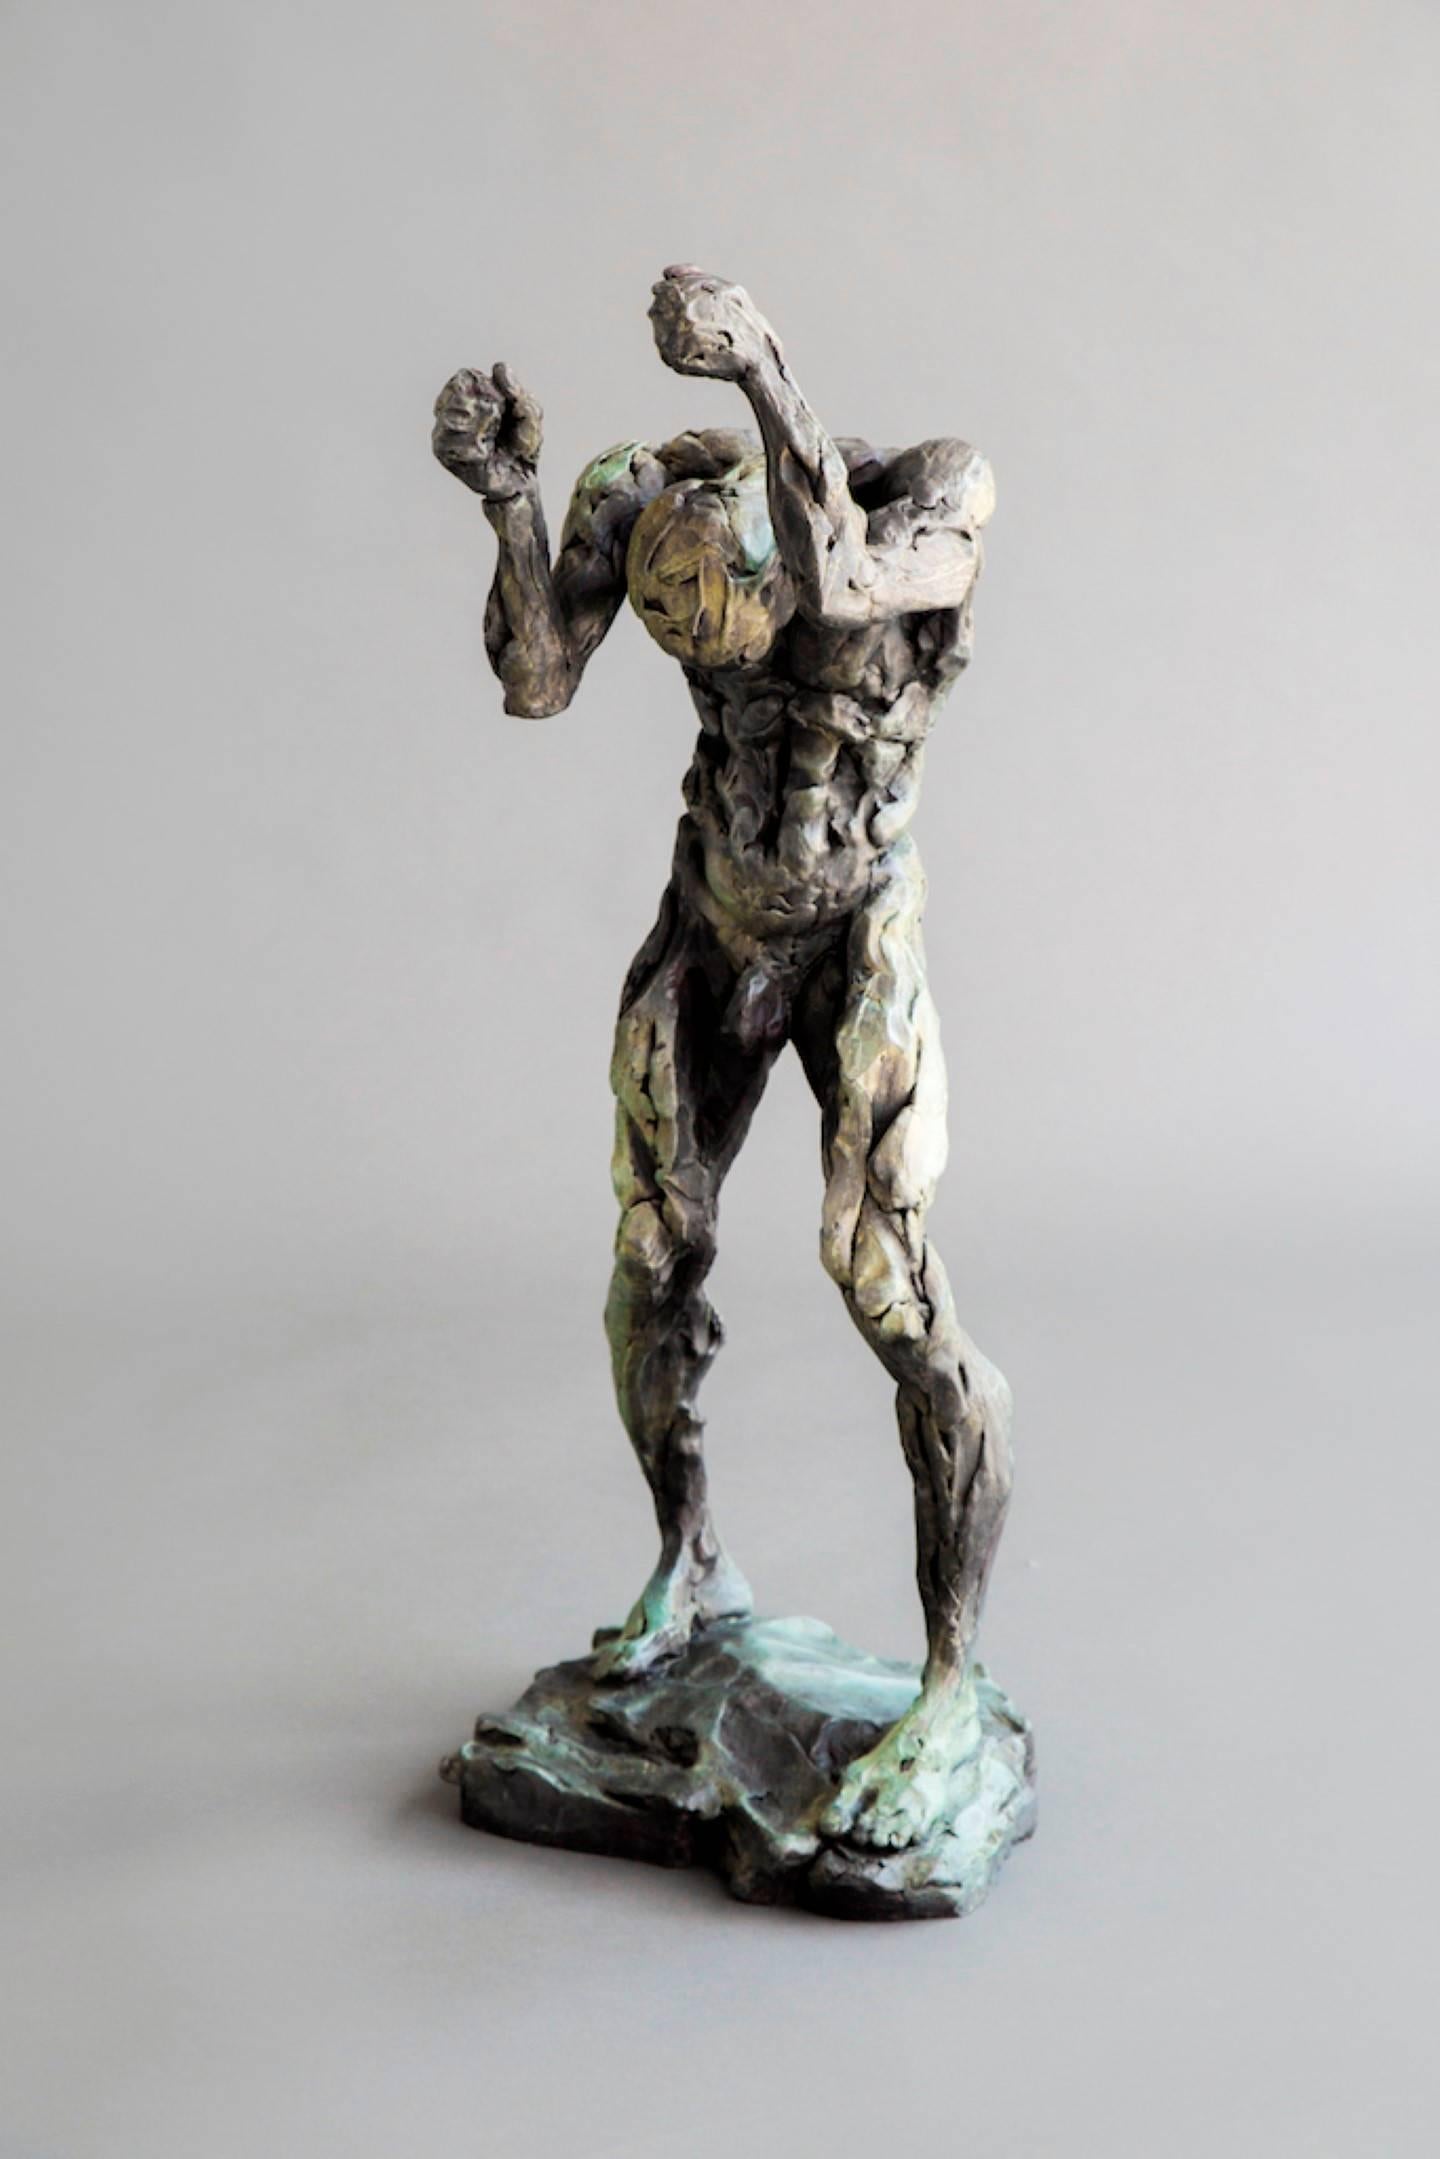 Orpheus after the disappearance of Eurydice - male, figurative, bronze sculpture